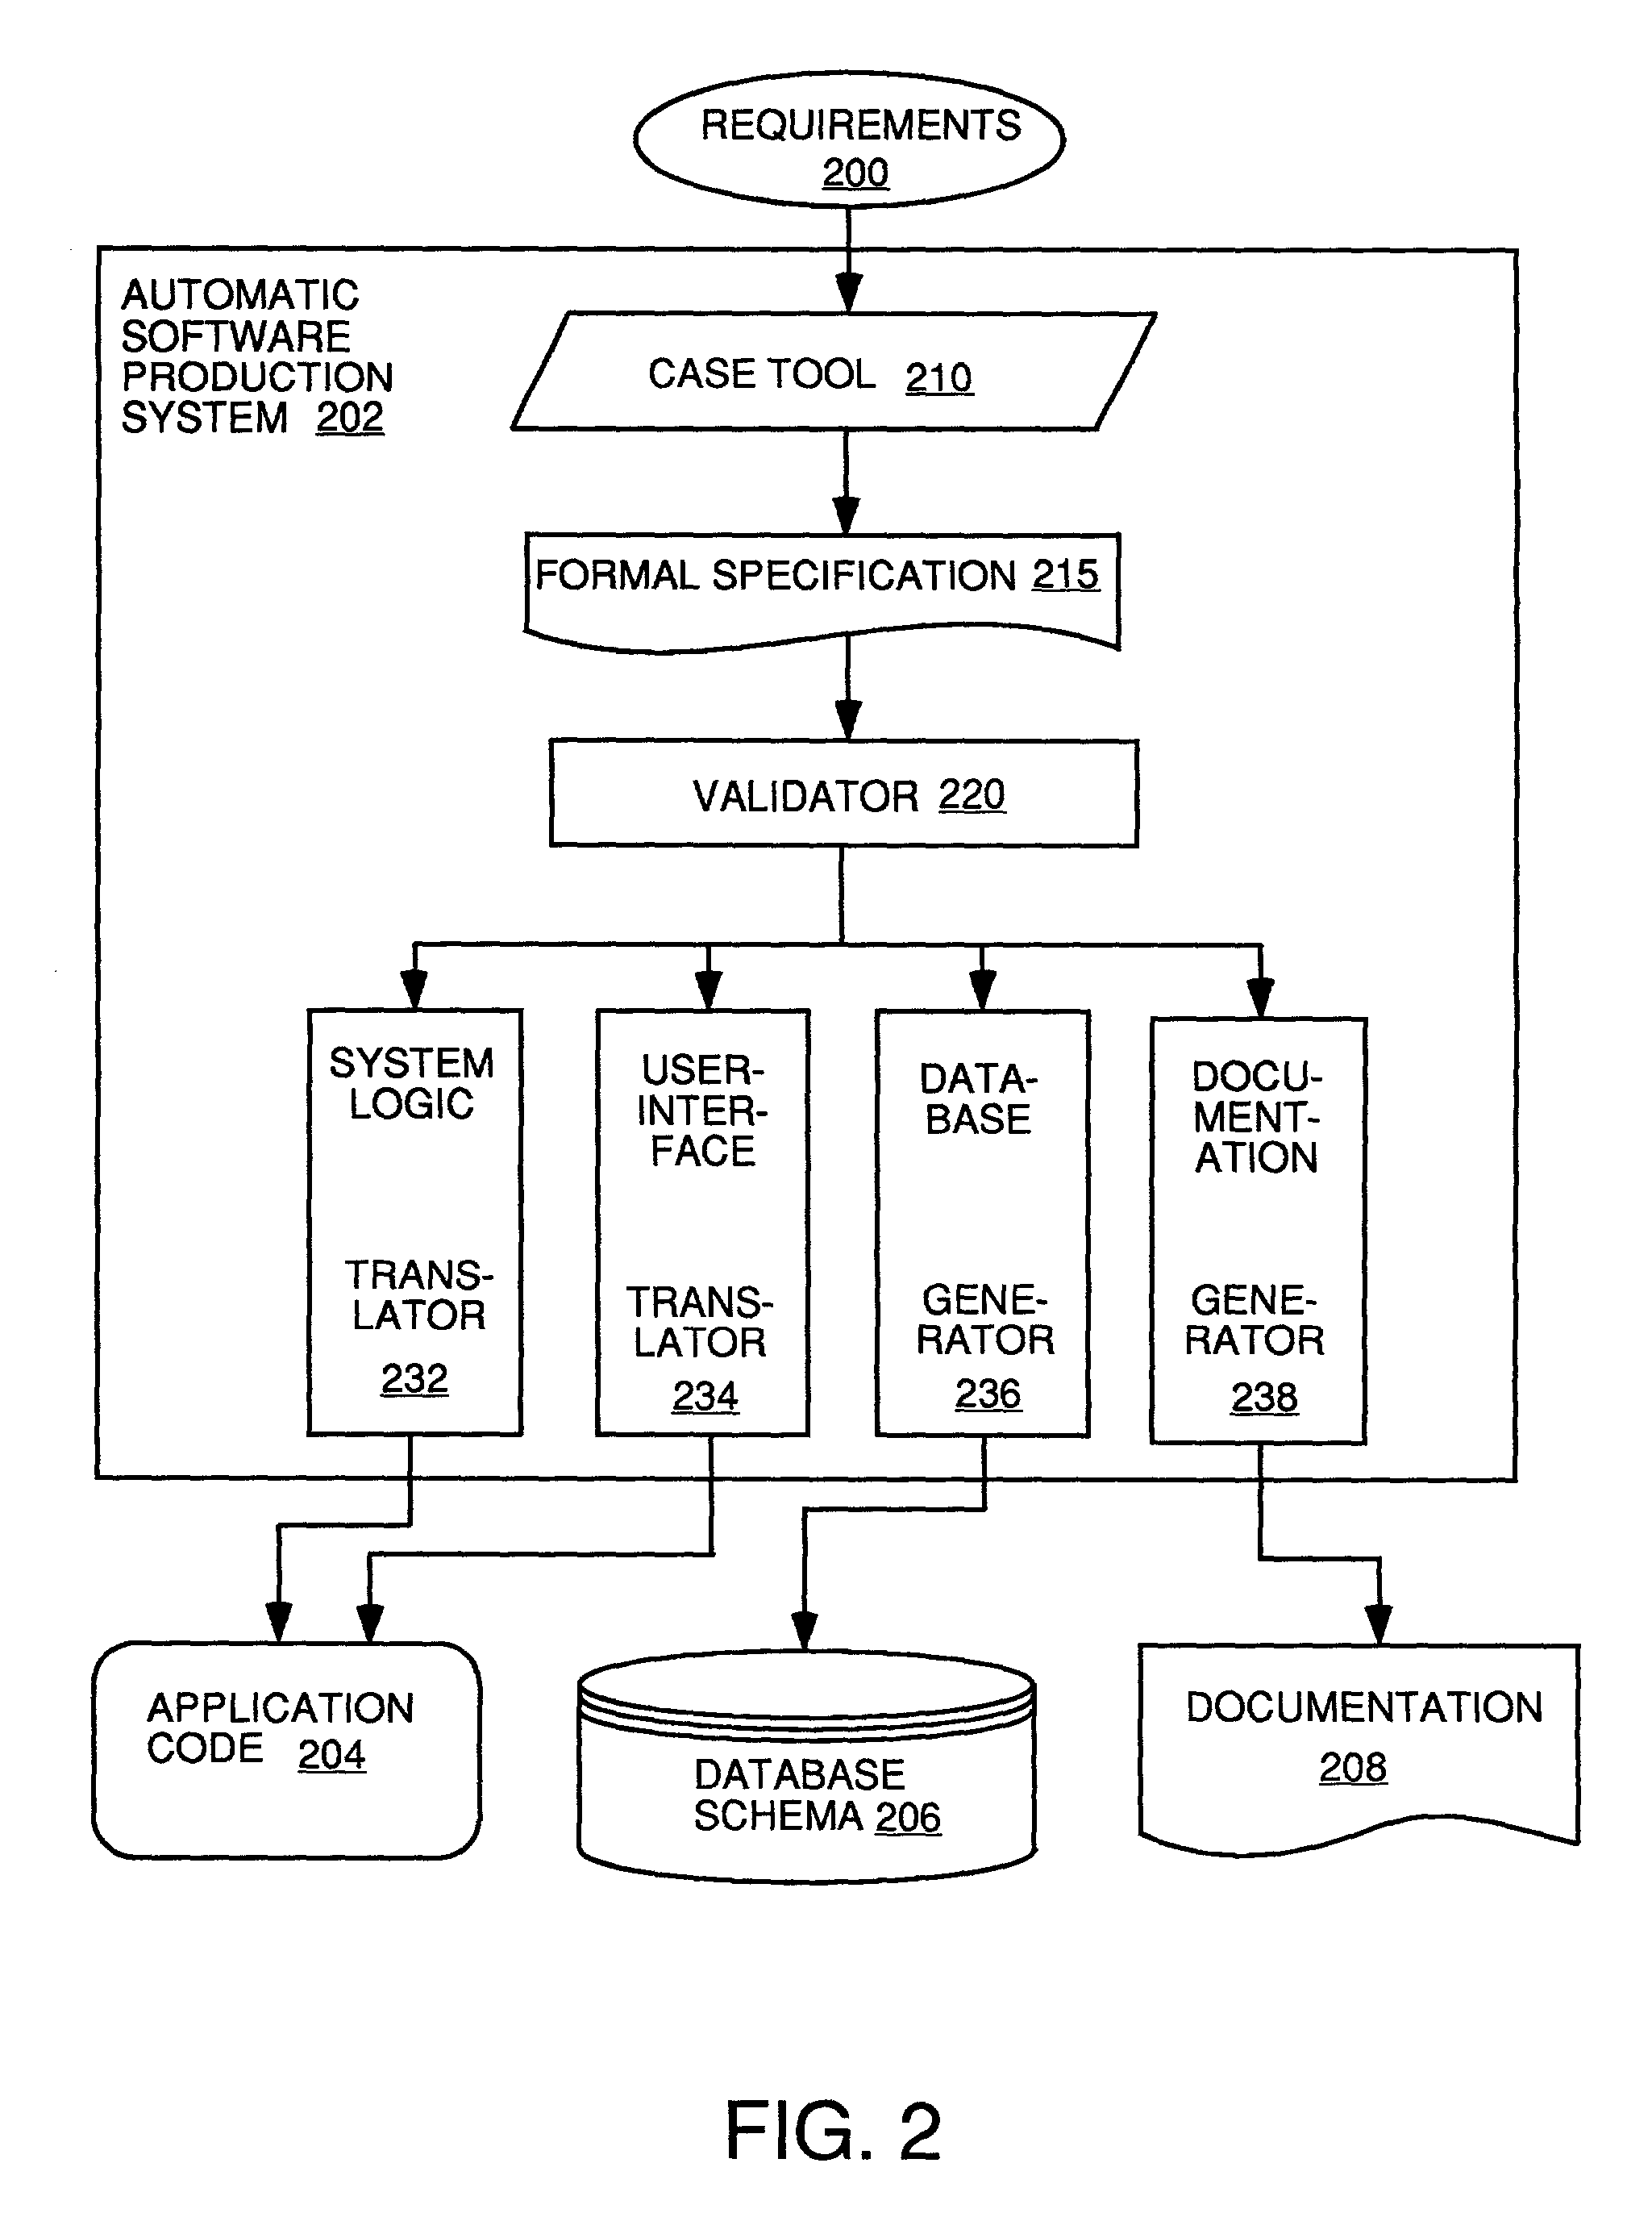 Automatic software production system